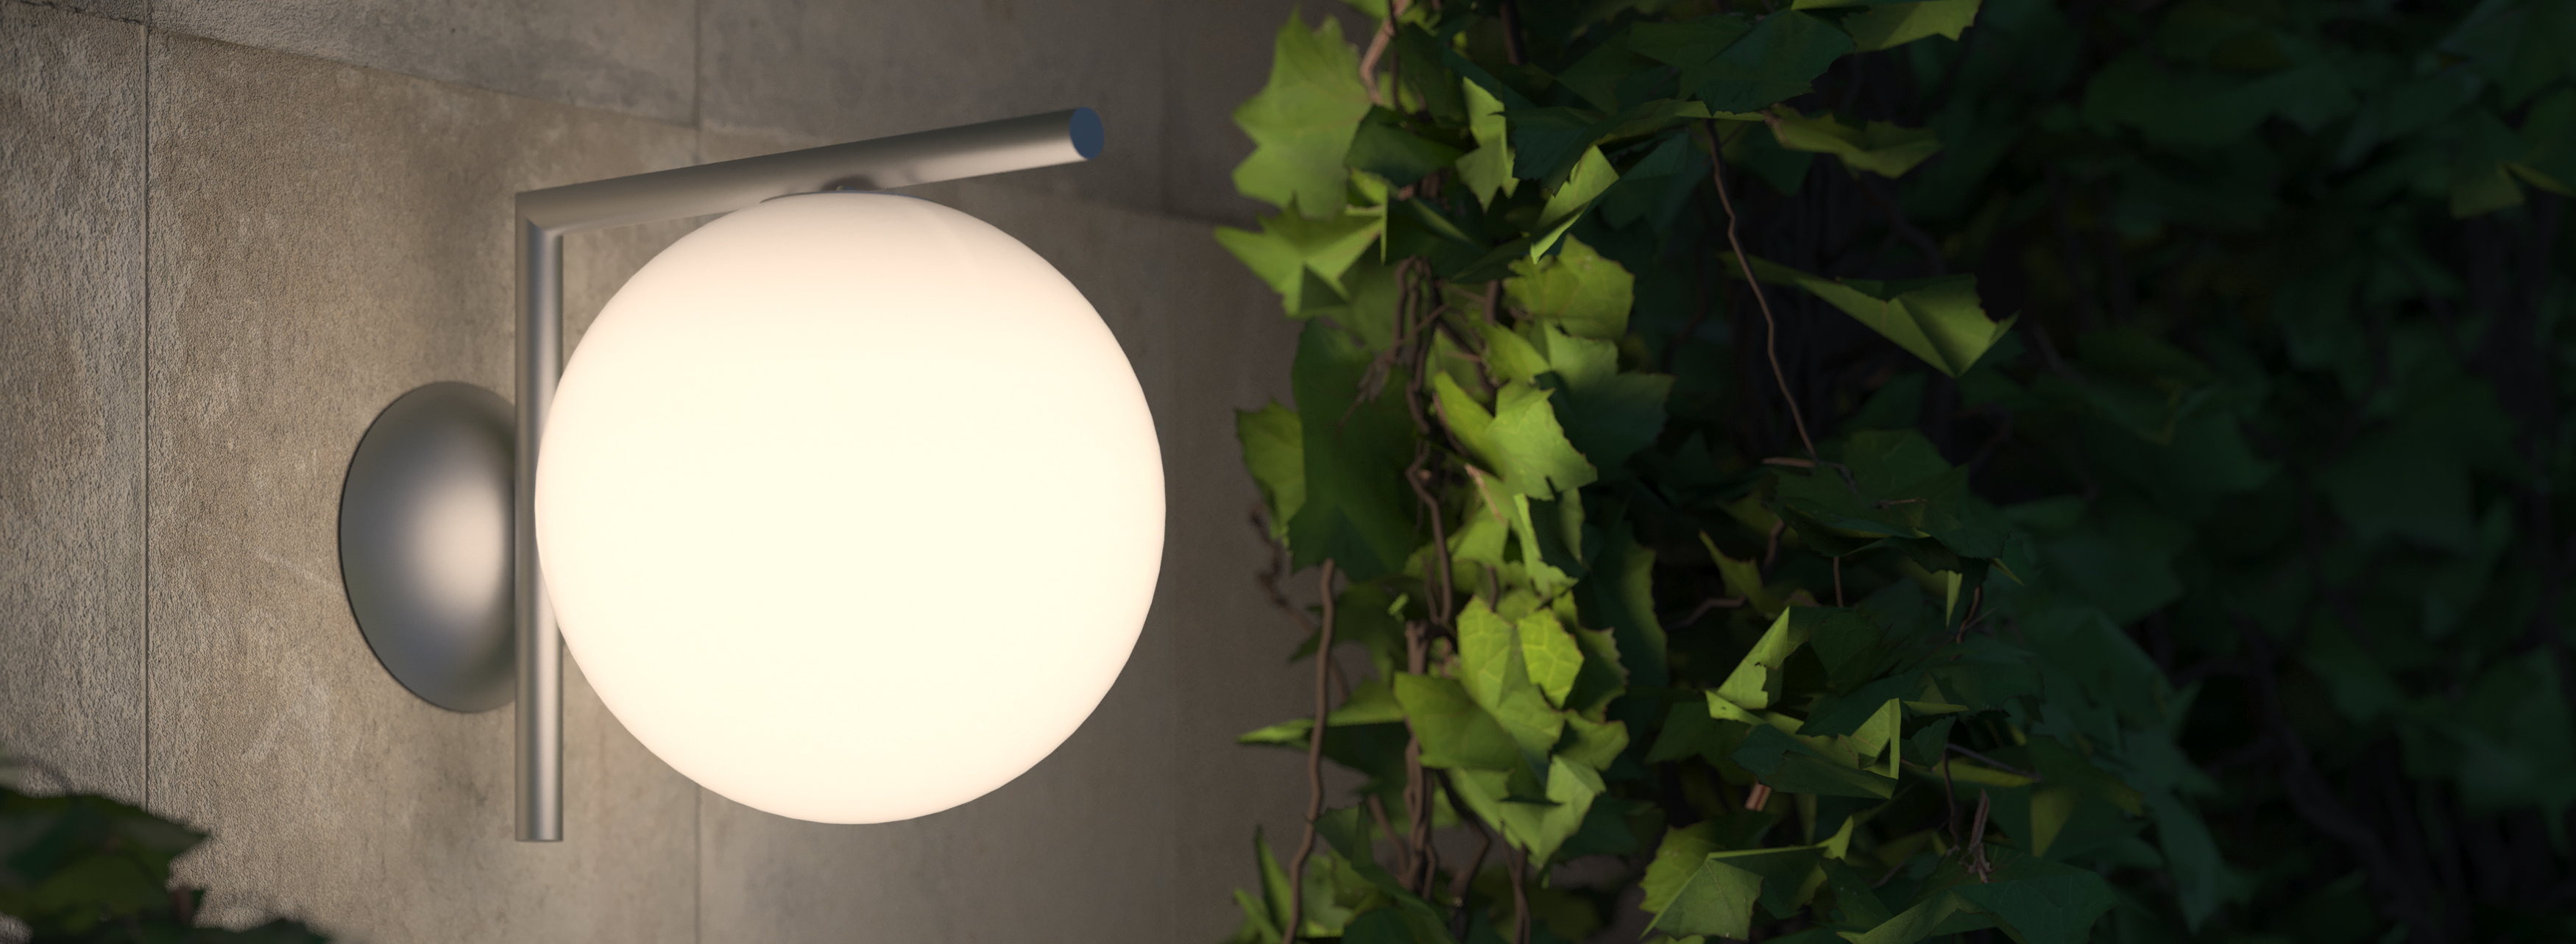 IC Lights Wall/Ceiling Outdoor lights | Flos